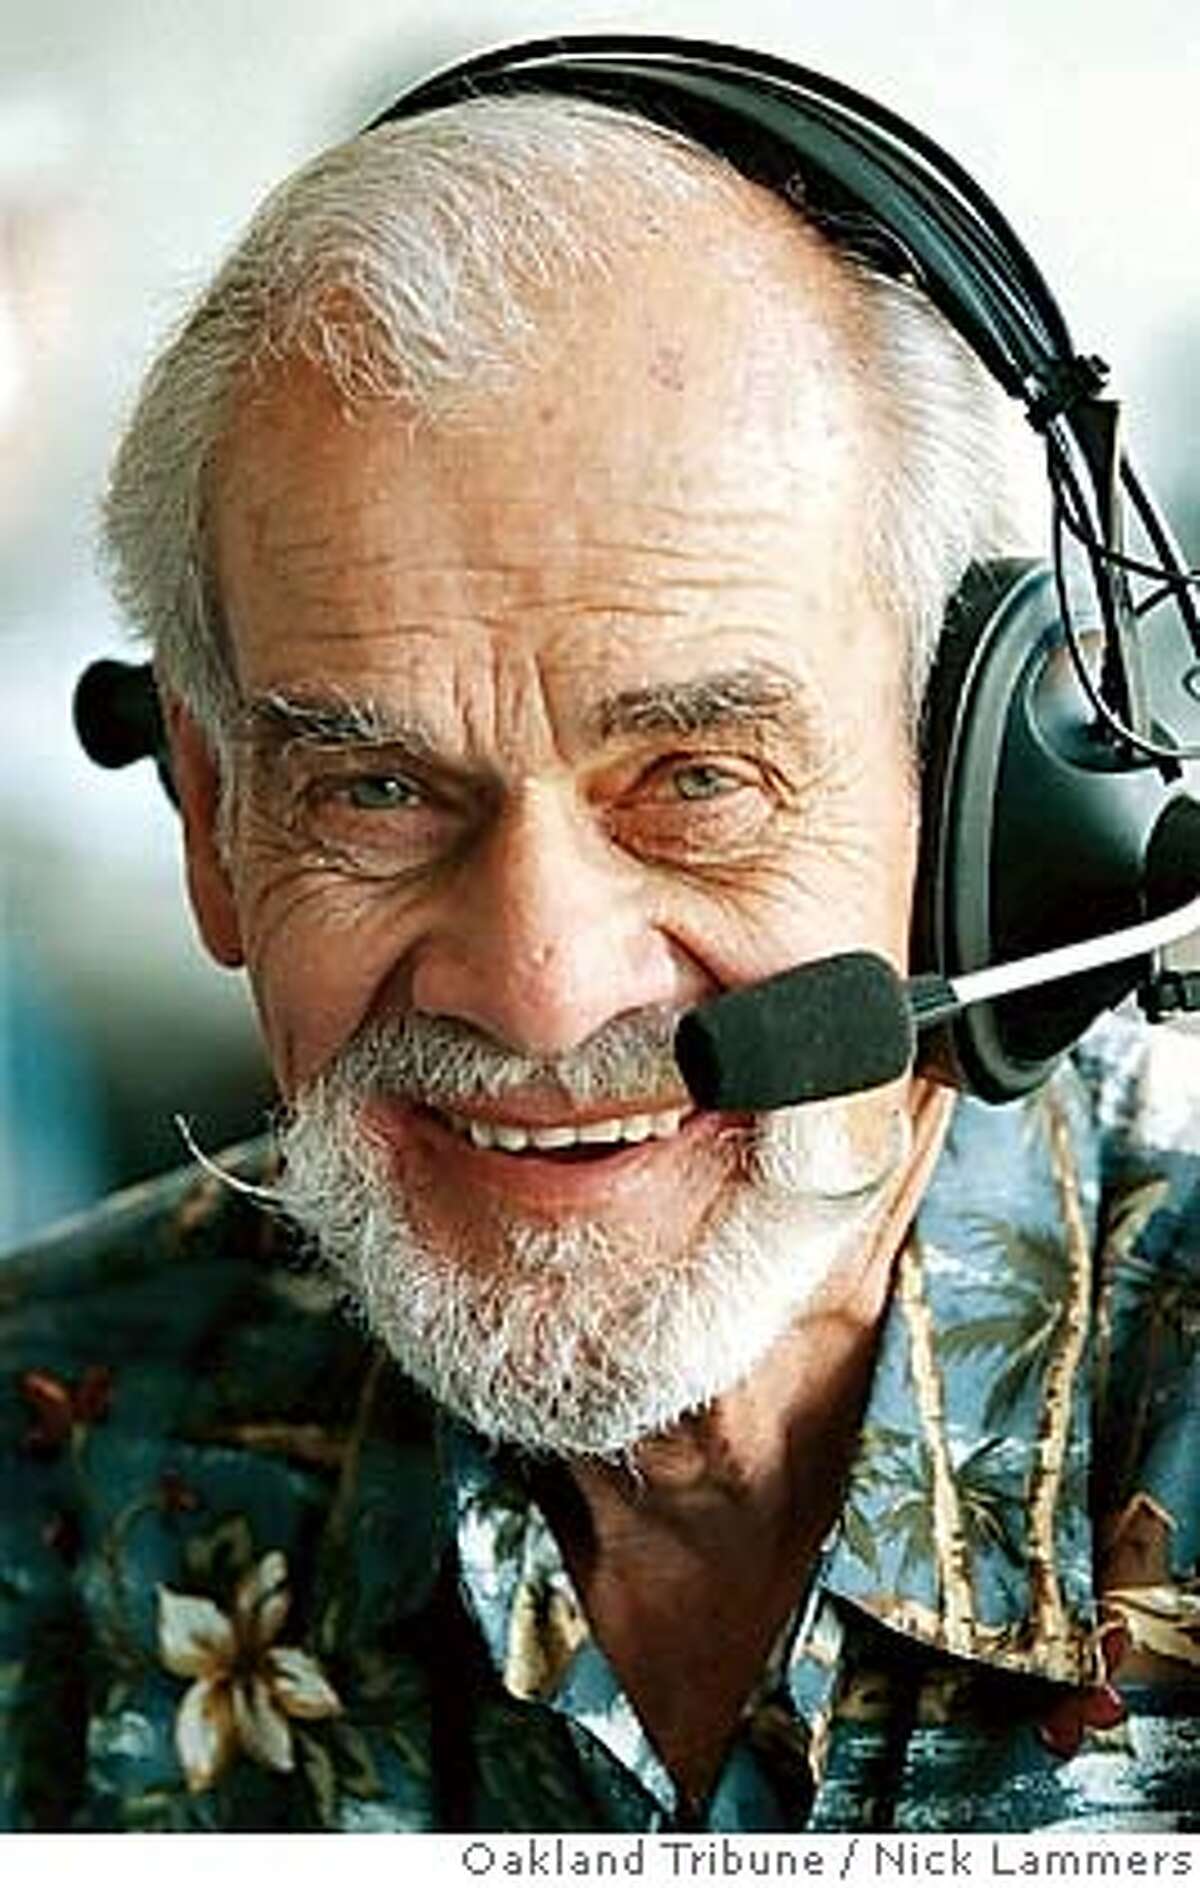 Longtime Oakland Athletics radio voice Bill King is shown in this photo taken Thursday, April 15, 1999, in Oakland Calif. King, whose signature call of "Holy Toledo!" was a household phrase for decades in the Bay Area, died early Tuesday, Oct. 18, 2005, from complications following hip surgery. He was 78. The A's said King died about 12:20 a.m. at a hospital in nearby San Leandro, three days after undergoing surgery for an injury sustained earlier this year. (AP Photo/Oakland Tribune / Nick Lammers) ** MAGS OUT, , MANDATORY CREDIT ** MAGS OUT, , MANDATORY CREDIT